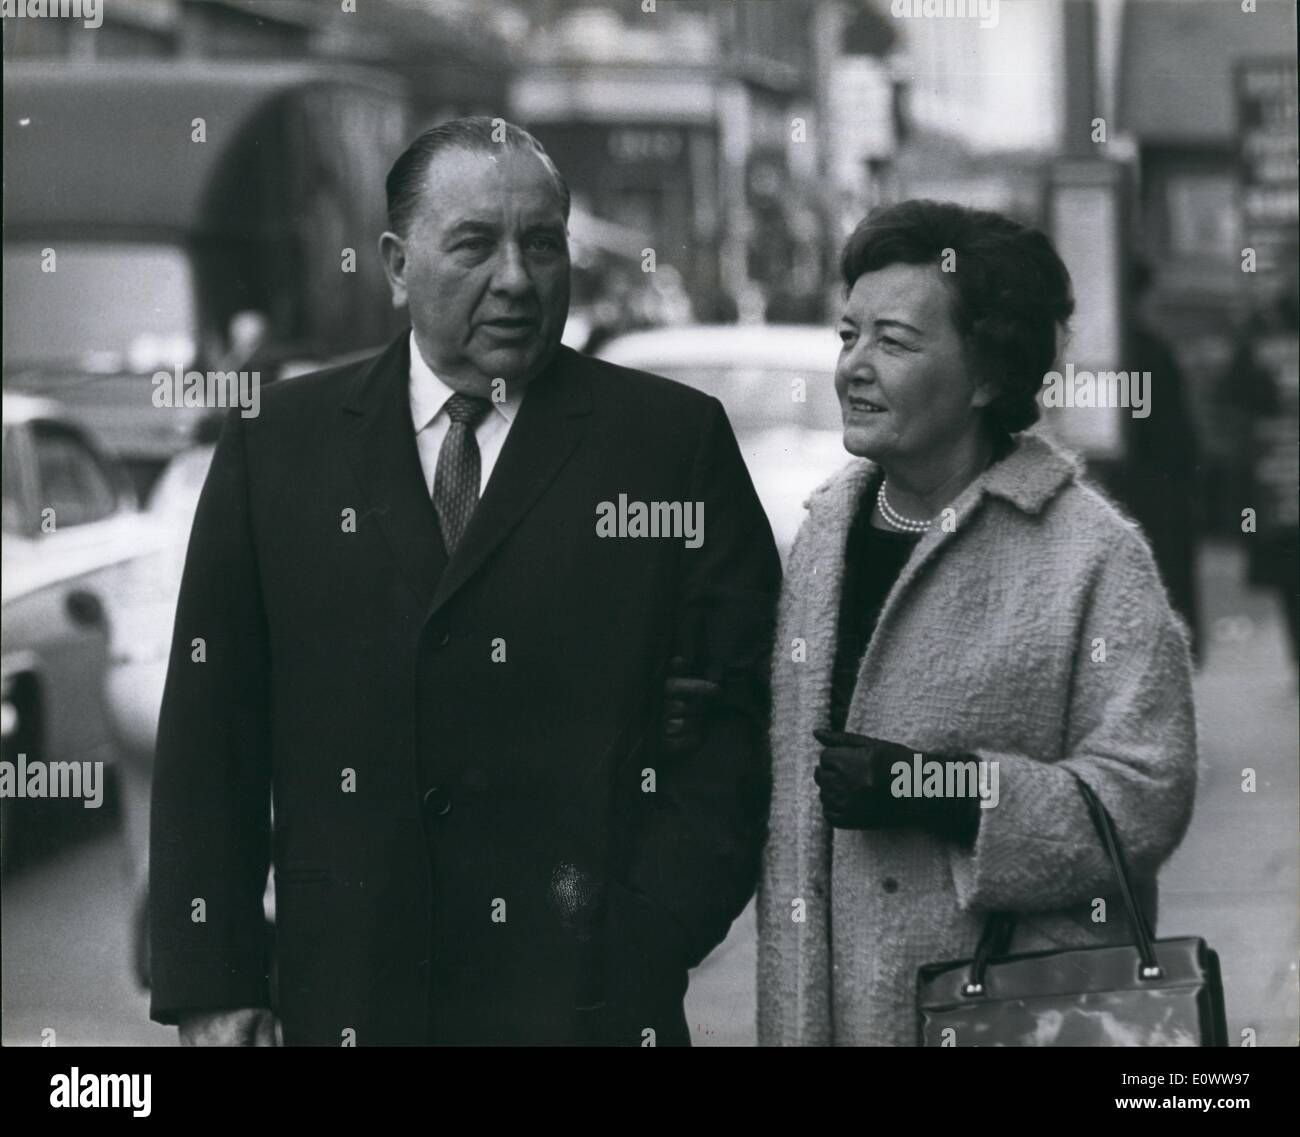 May 05, 1964 - Mayor of Chicago in London.: Mr. Richard Dally, the Mayor of Chicago, U.S.A. is in London on a visit. Photo shows Mr. and Mrs. Dally walking in London yesterday. Stock Photo